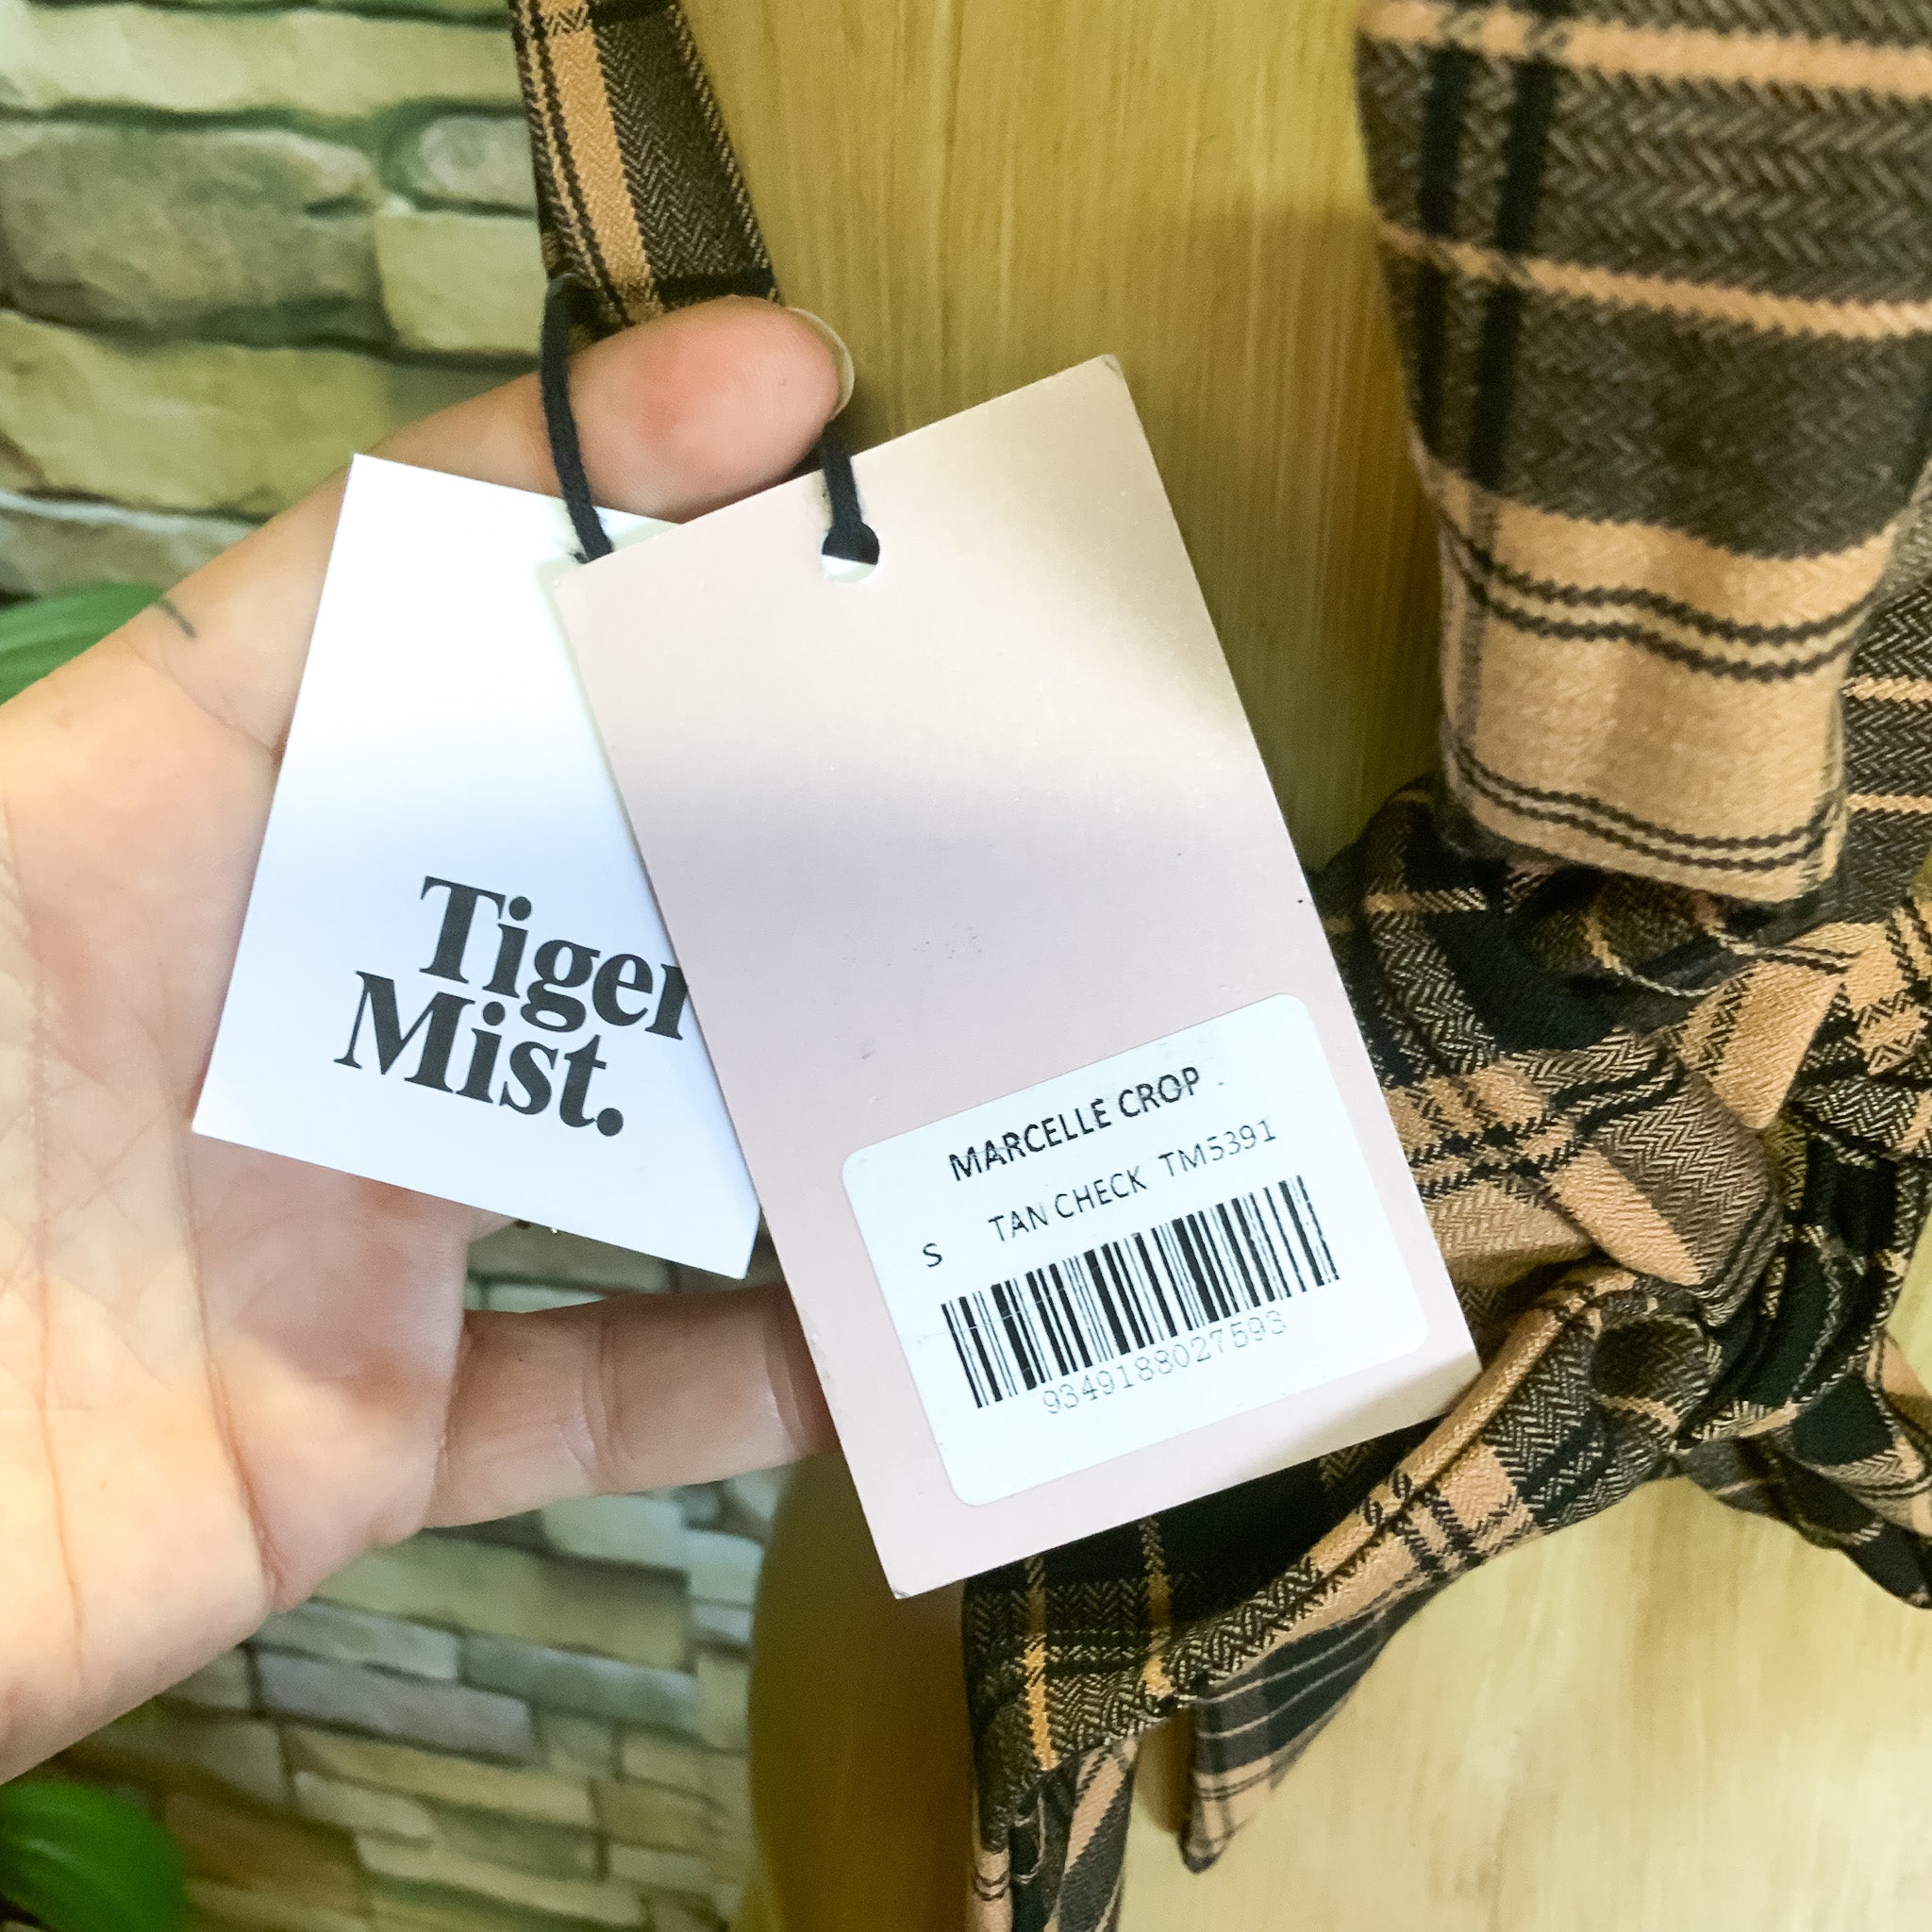 BNWT TIGER MIST Plaid ‘MARCELLE’ Tie Back Preppy Cropped Top - Size S